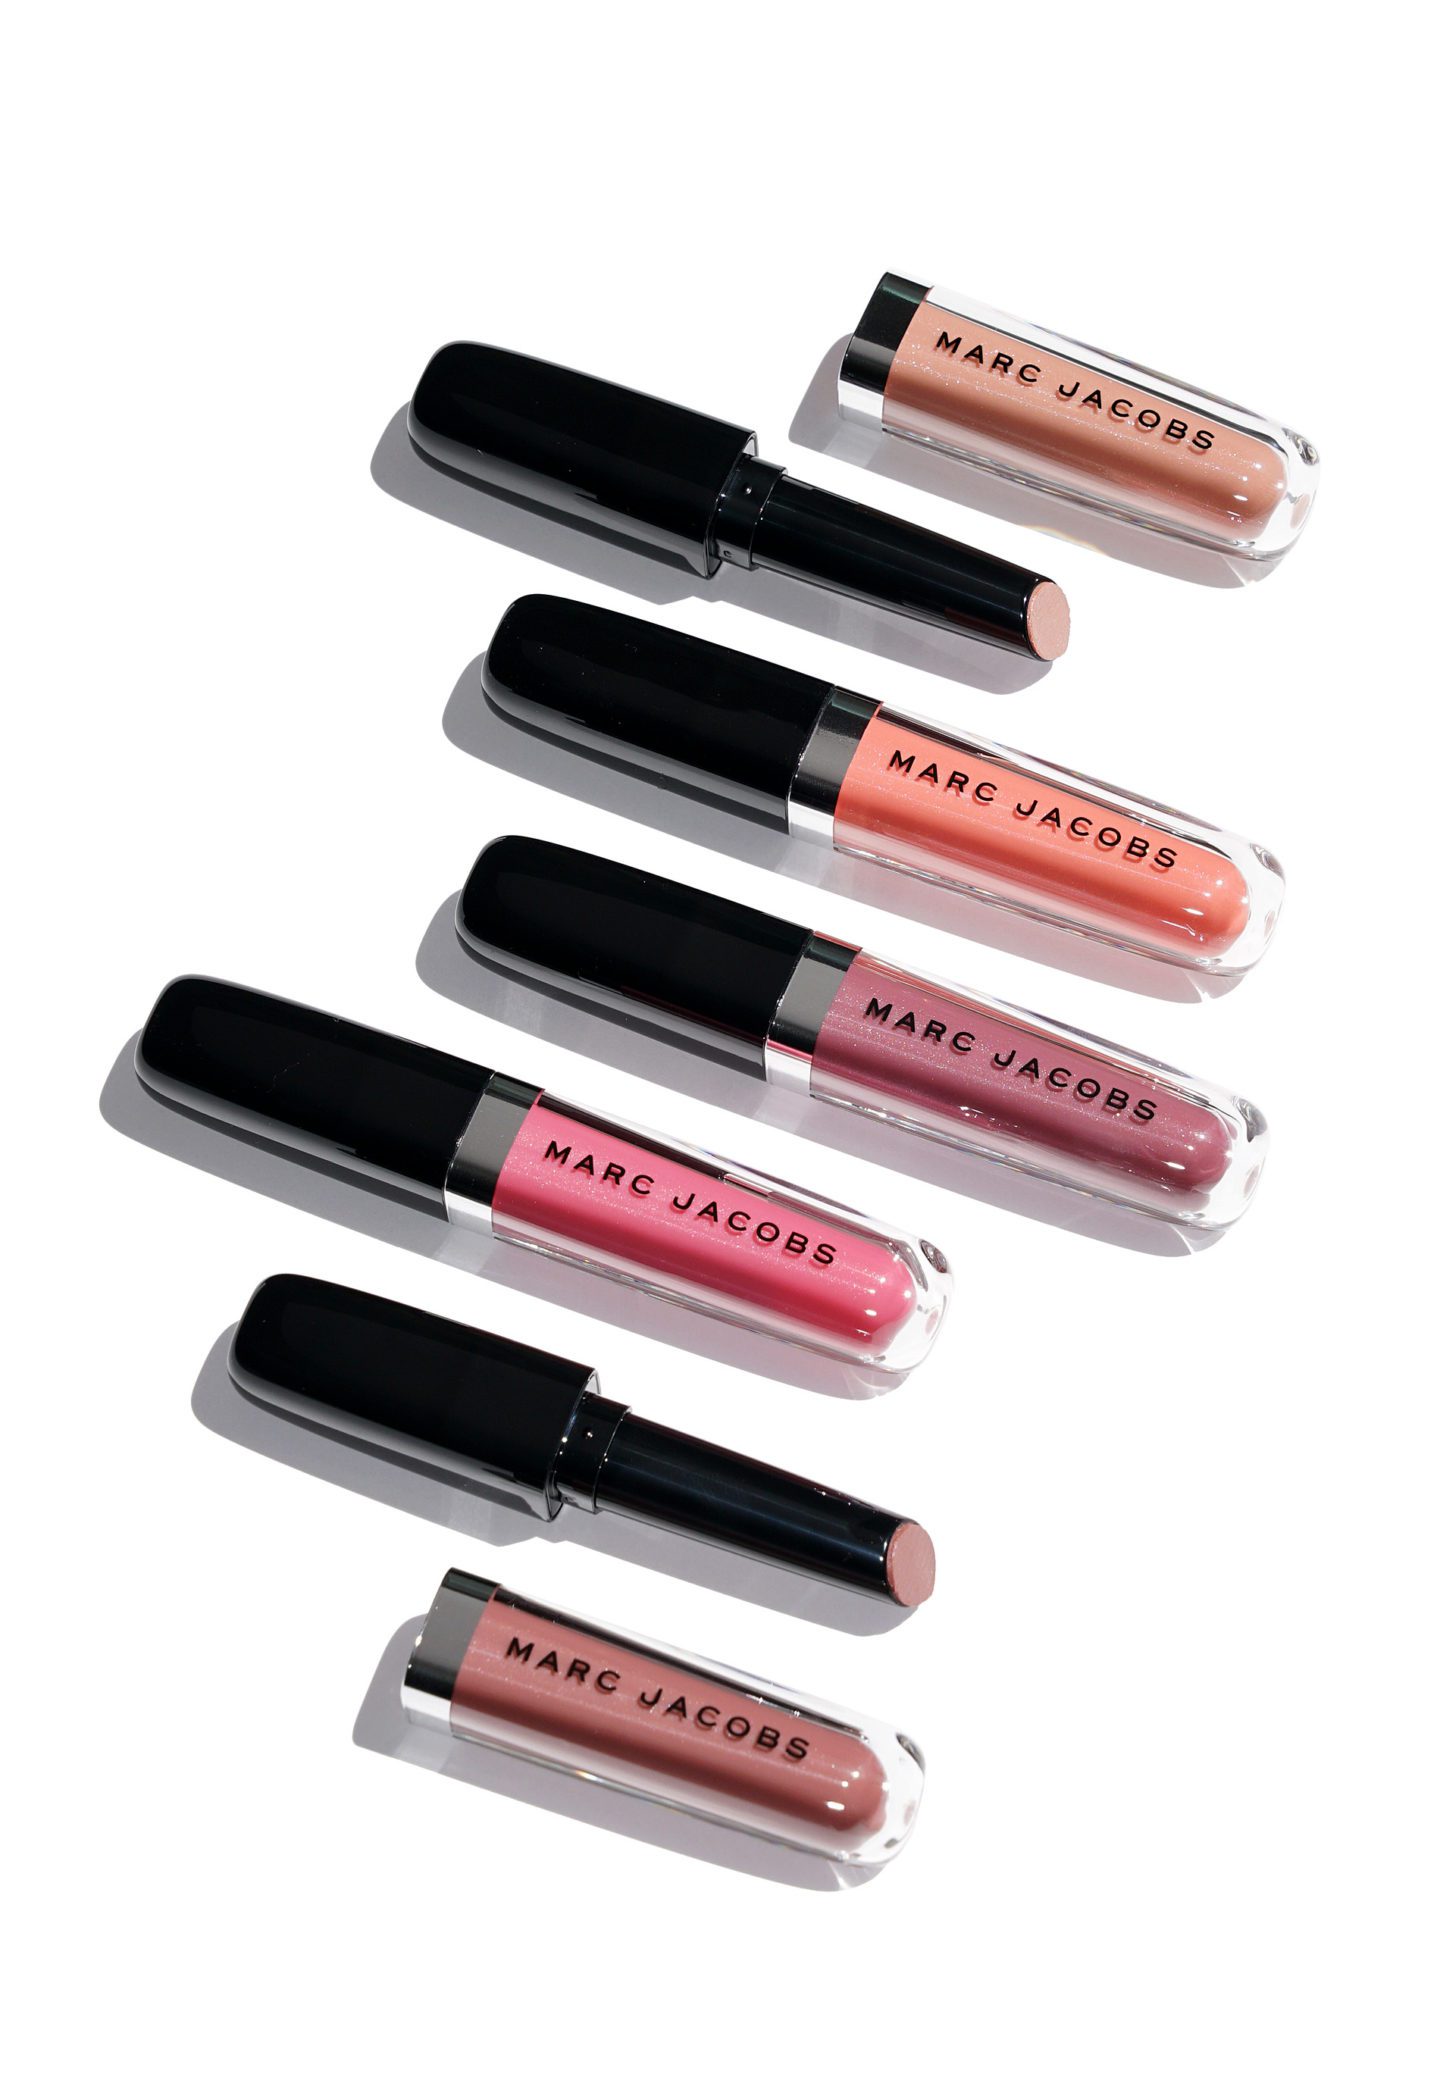 Marc Jacobs Beauty Enamored Hydrating Lip Gloss Stick | The Beauty Look Book